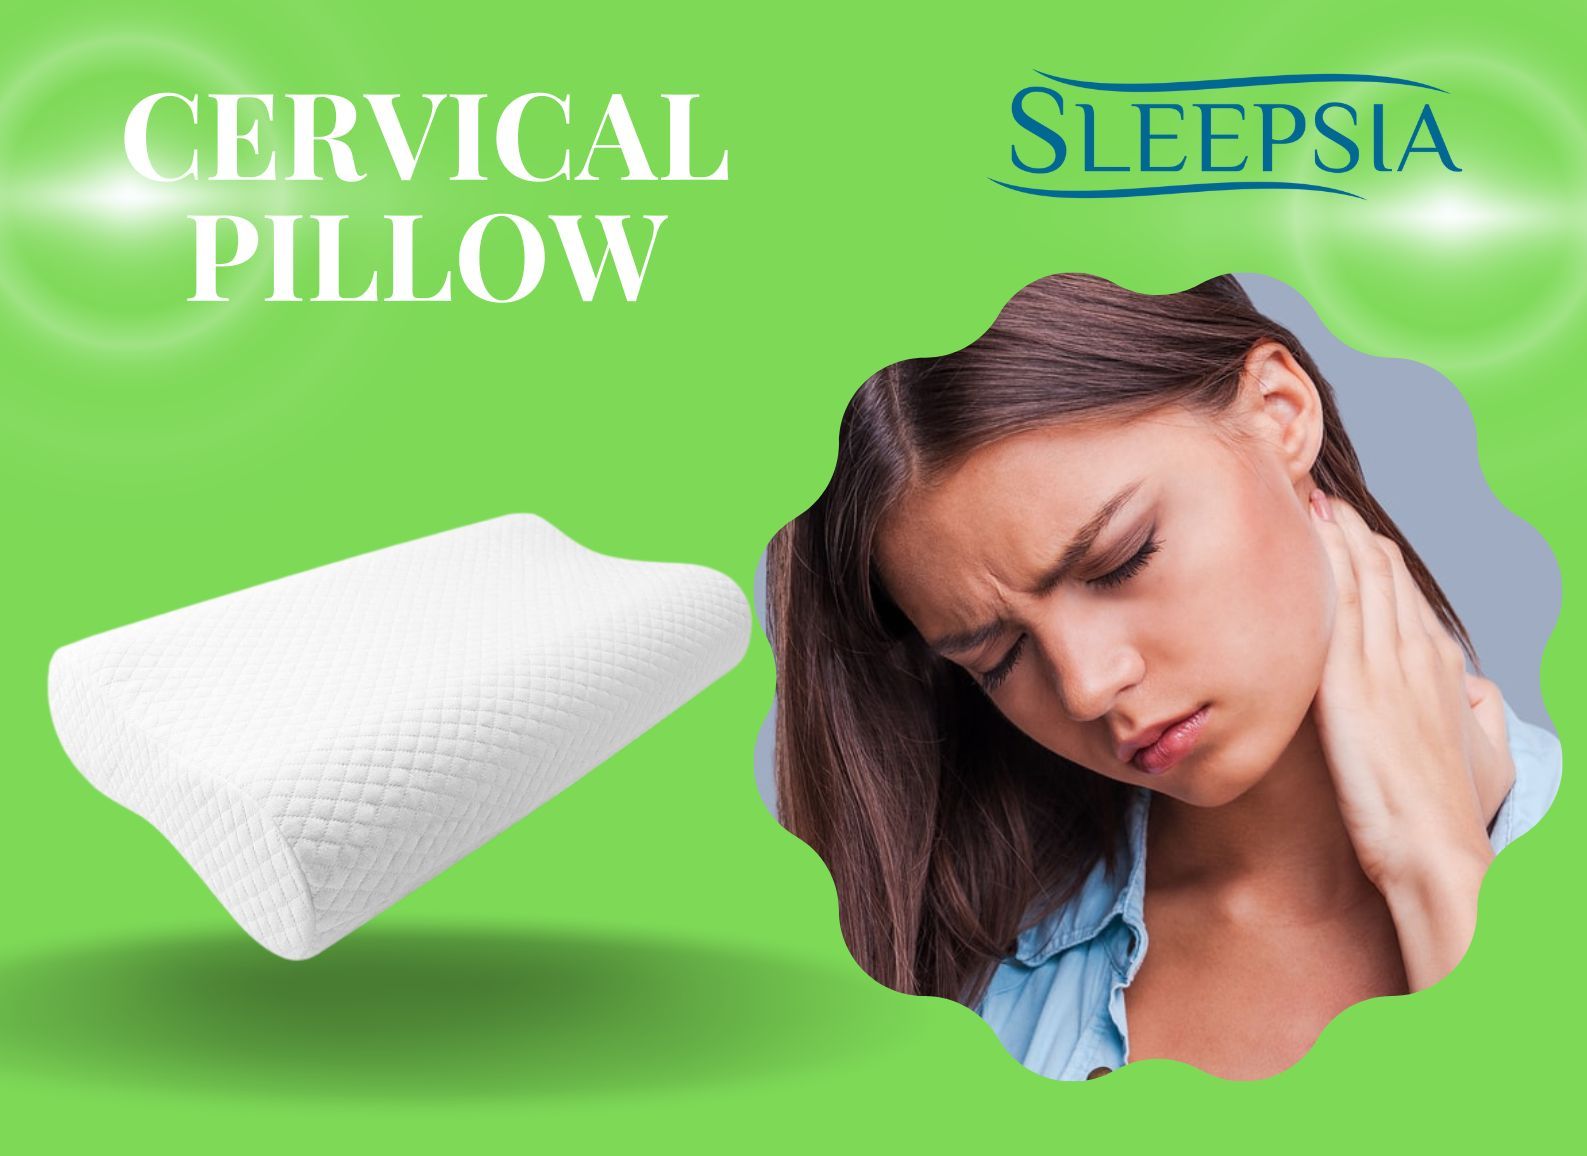 Cervical Pillow: Improving Sleep Quality and Alleviating Neck Pain